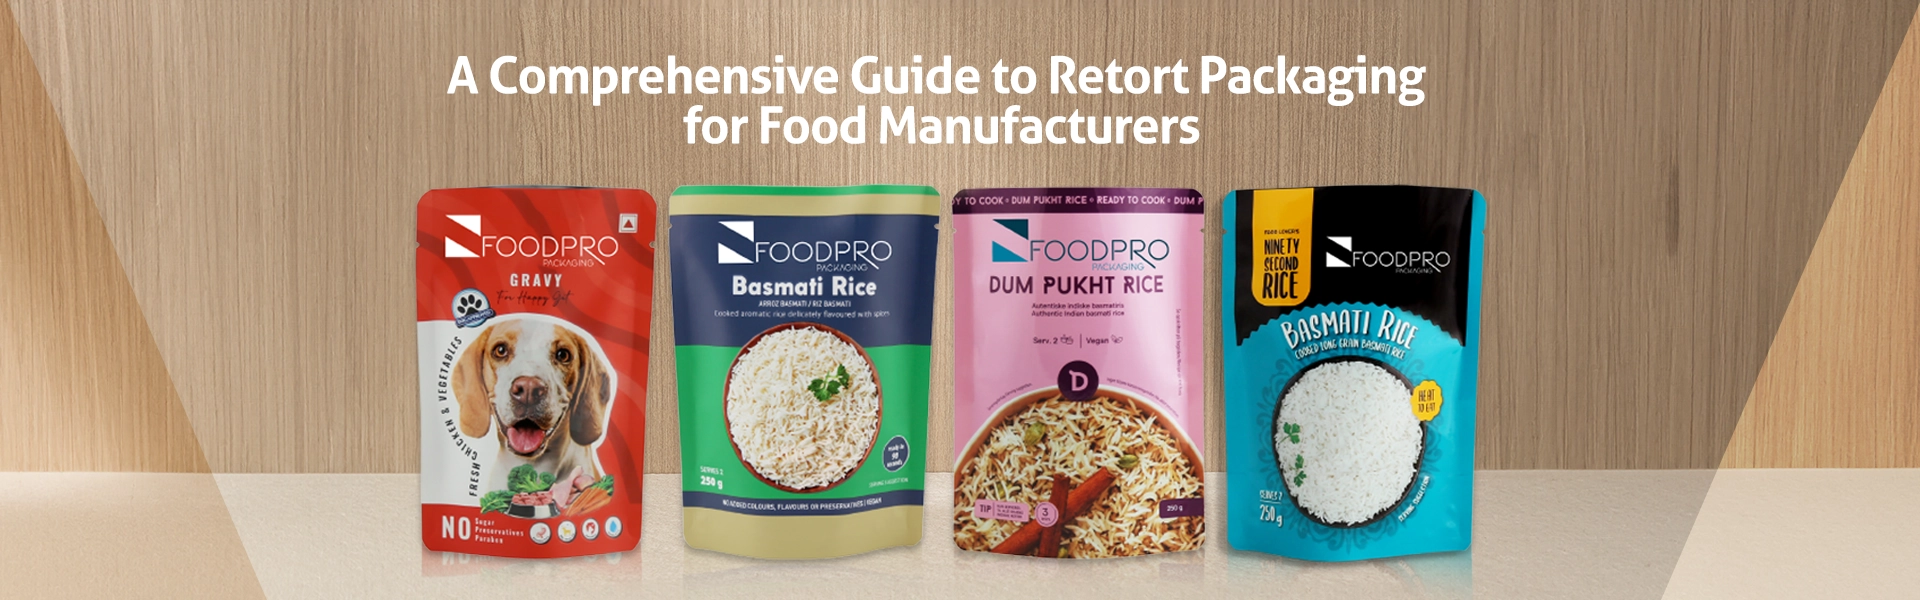 A Comprehensive Guide to Retort Packaging for Food Manufacturers